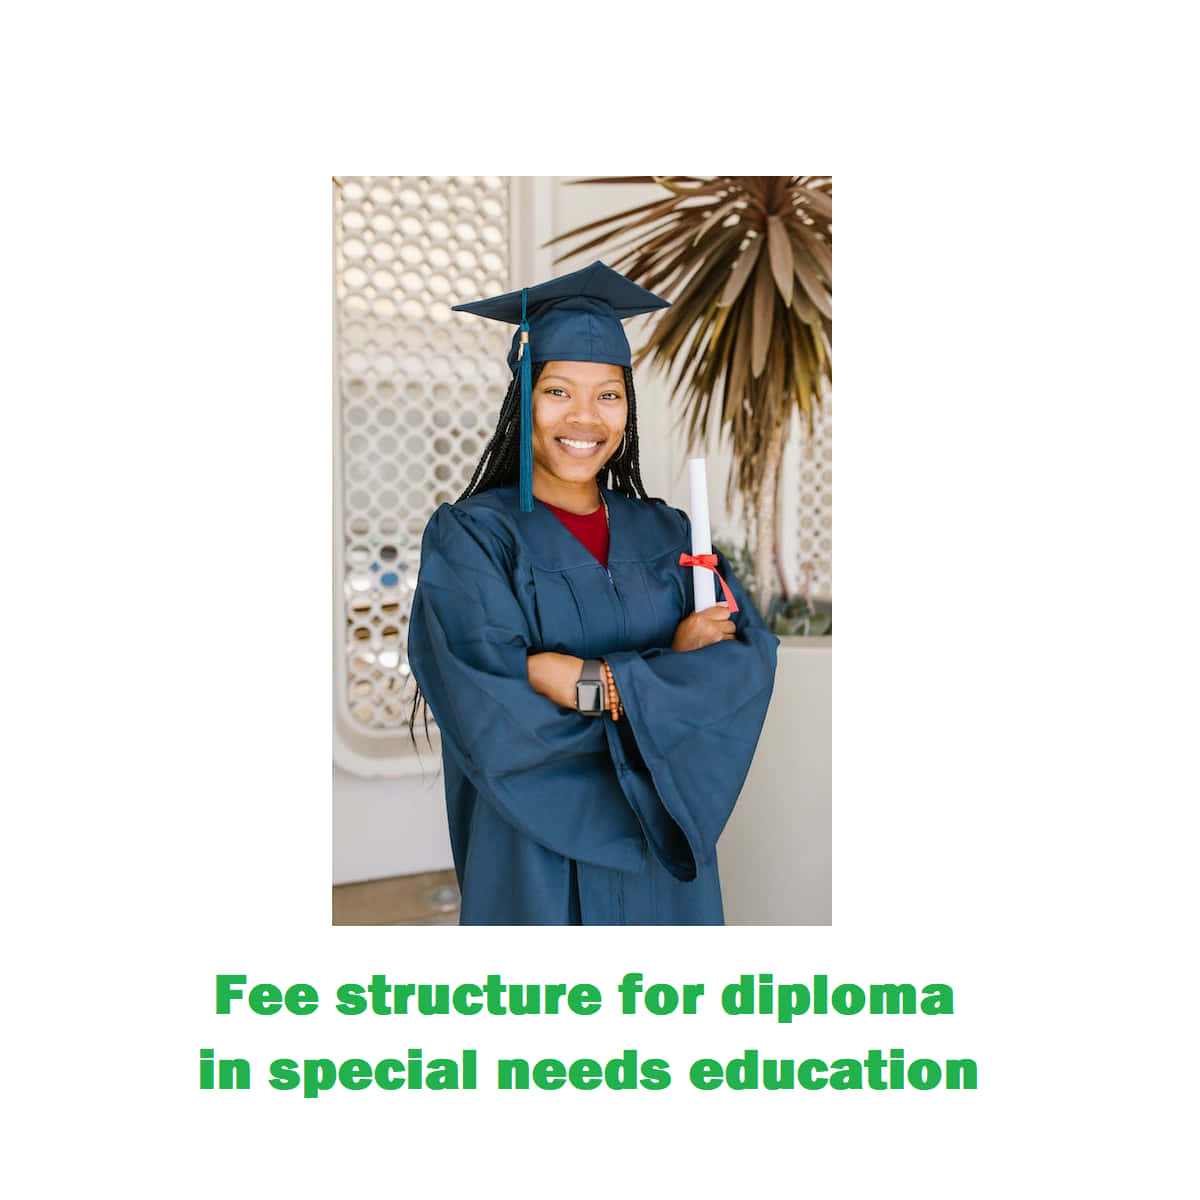 Fee structure for diploma in special needs education